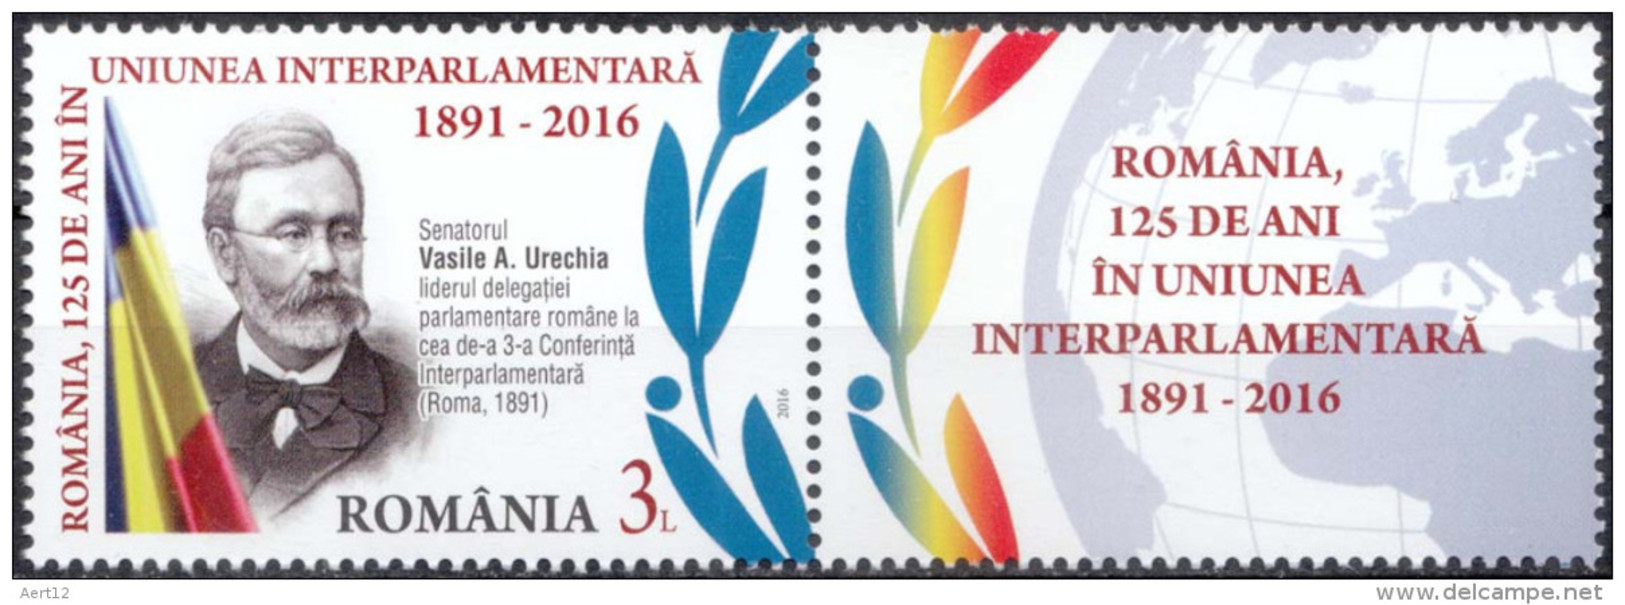 ROMANIA, 2016, 125 YEARS IN THE IPU, International Organizations, Famous People, Stamp Vith Label, MNH (**), LPMP 2101 - Neufs